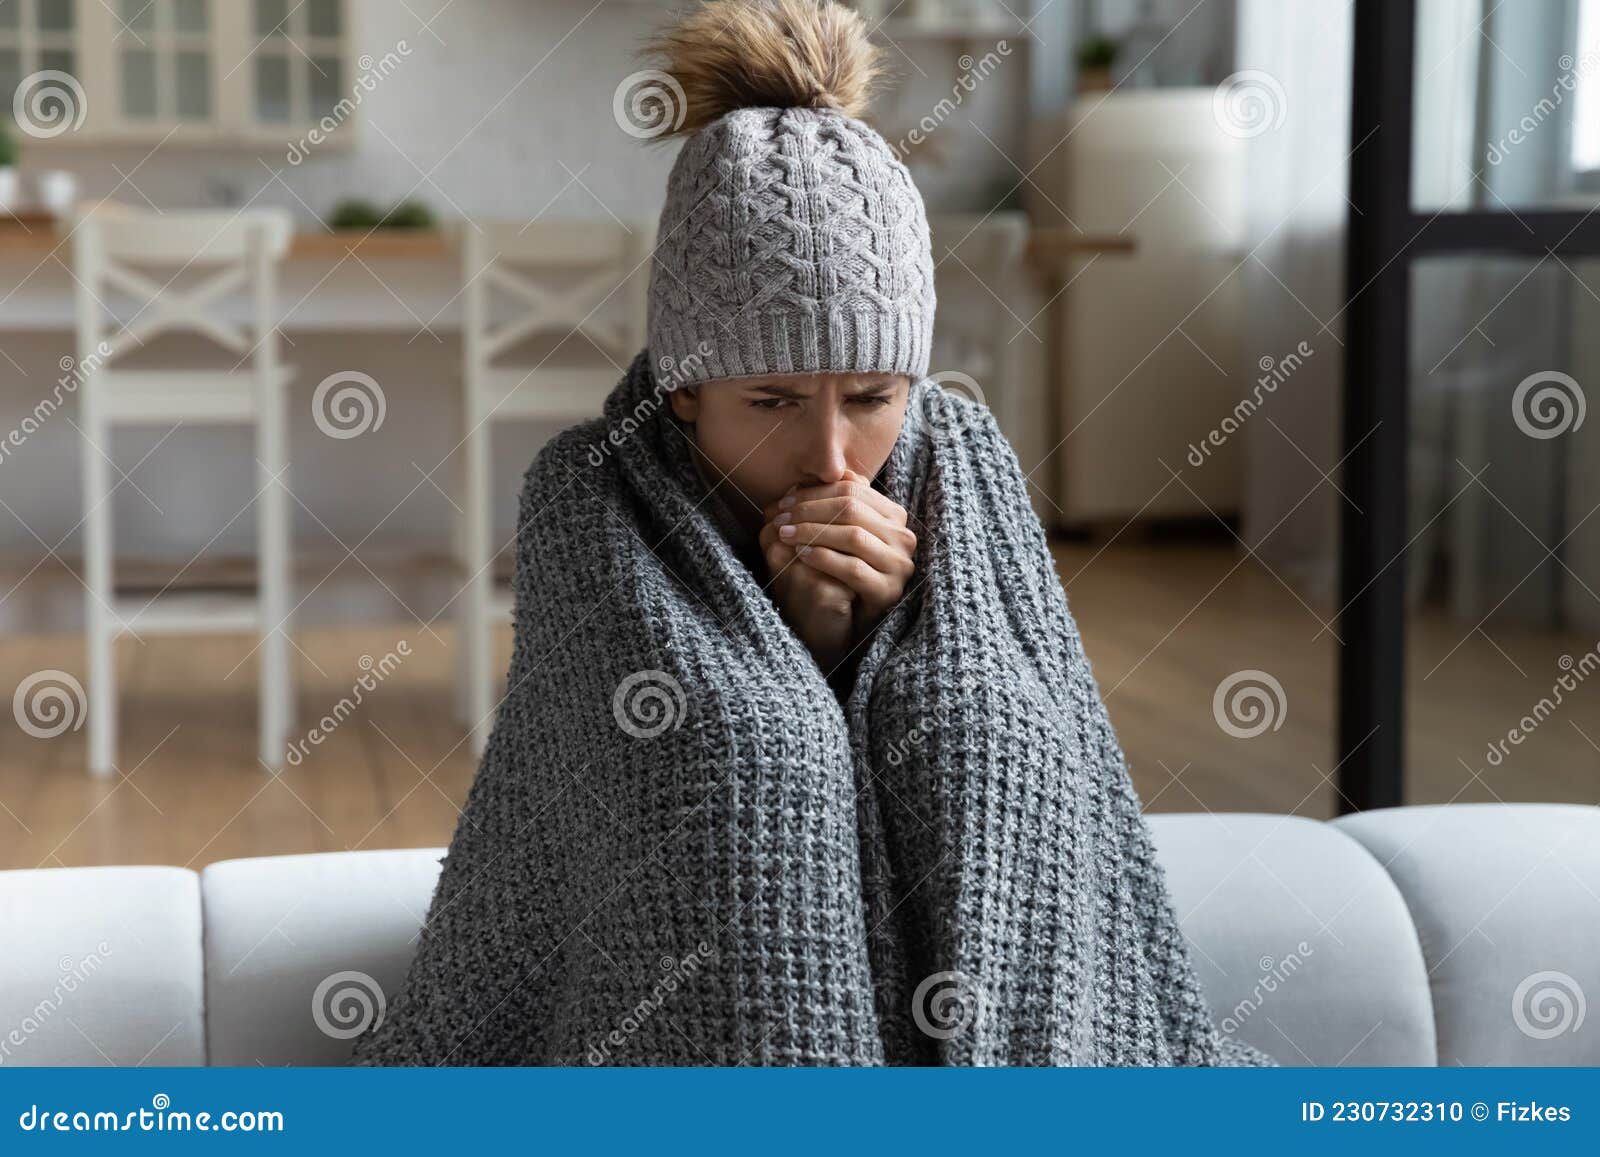 unwell woman feel cold in home with no heating